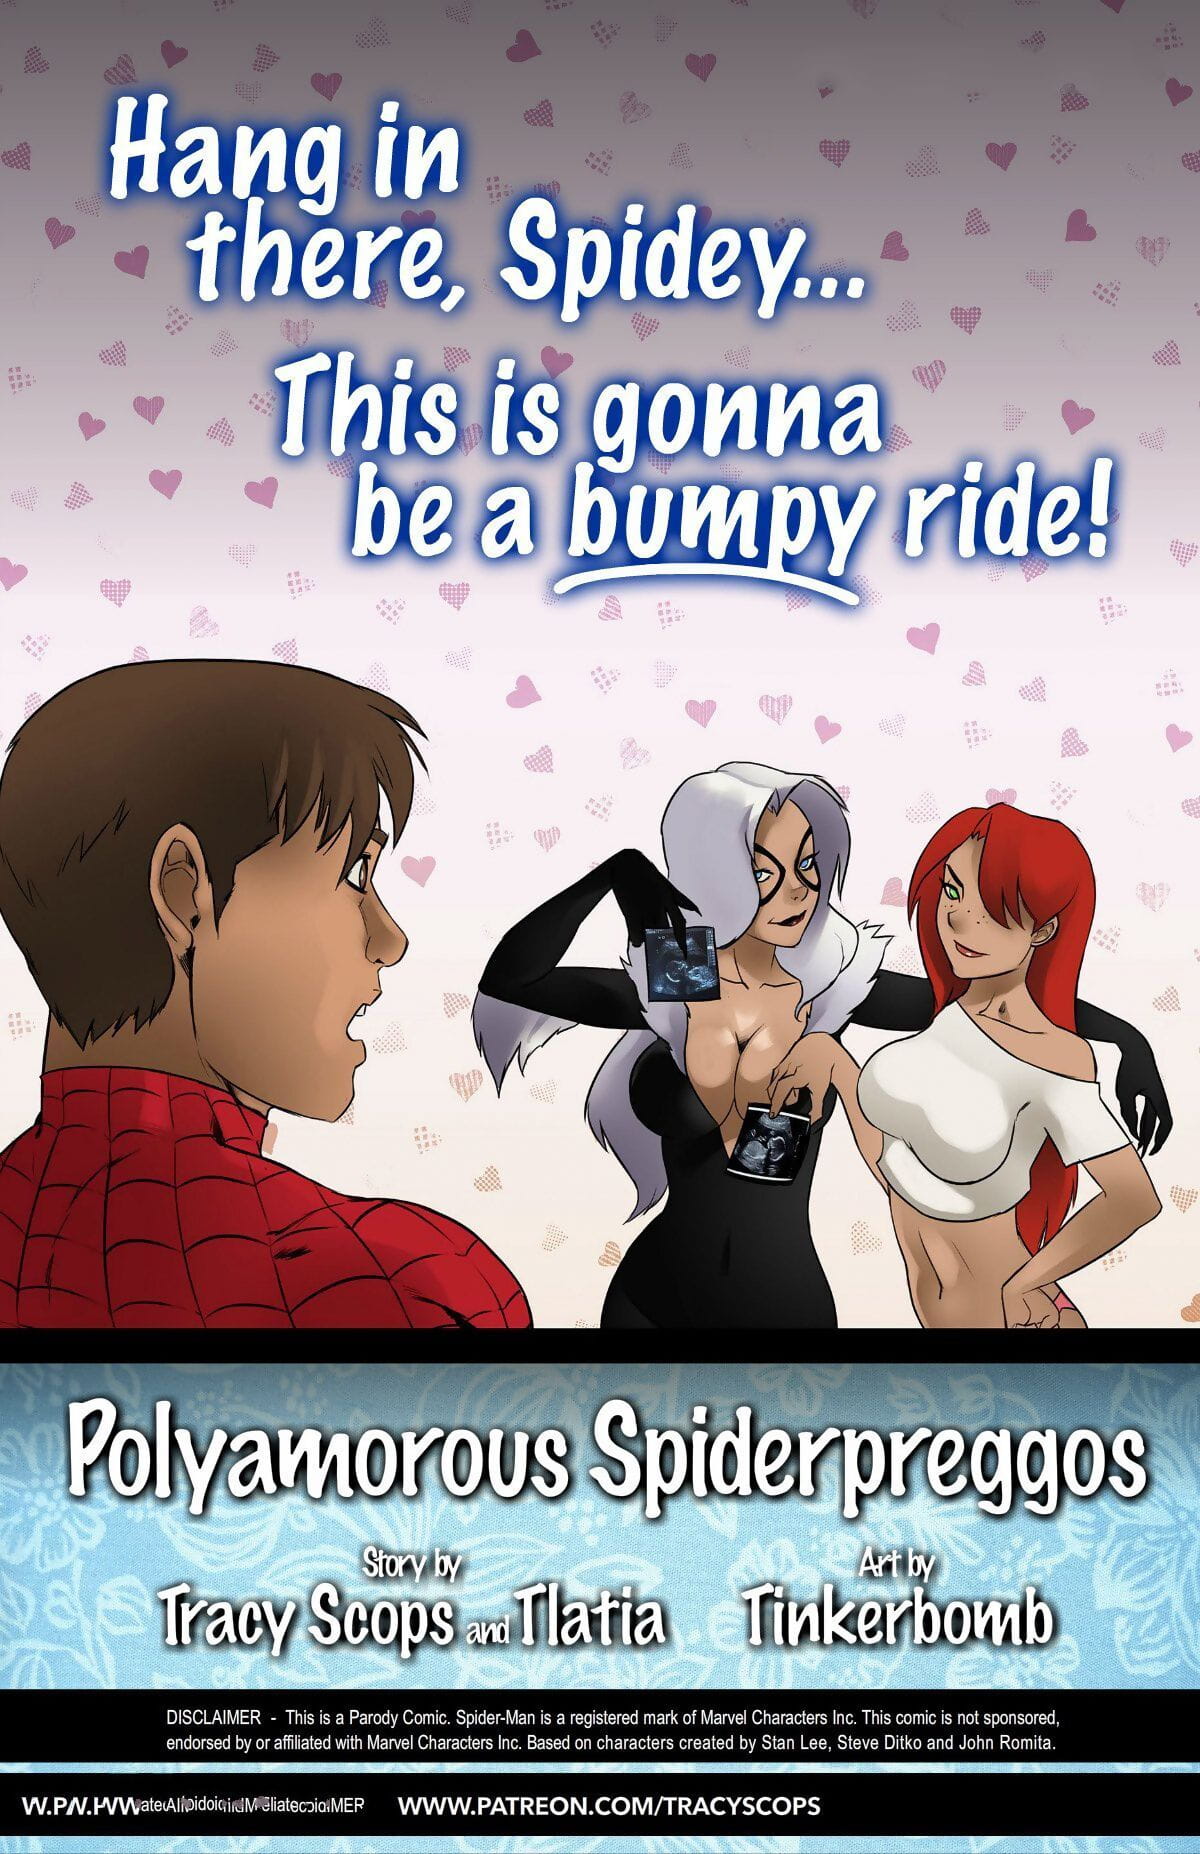 Tracy assiolo il polyamorous spiderpreggos tinkerbomb page 1